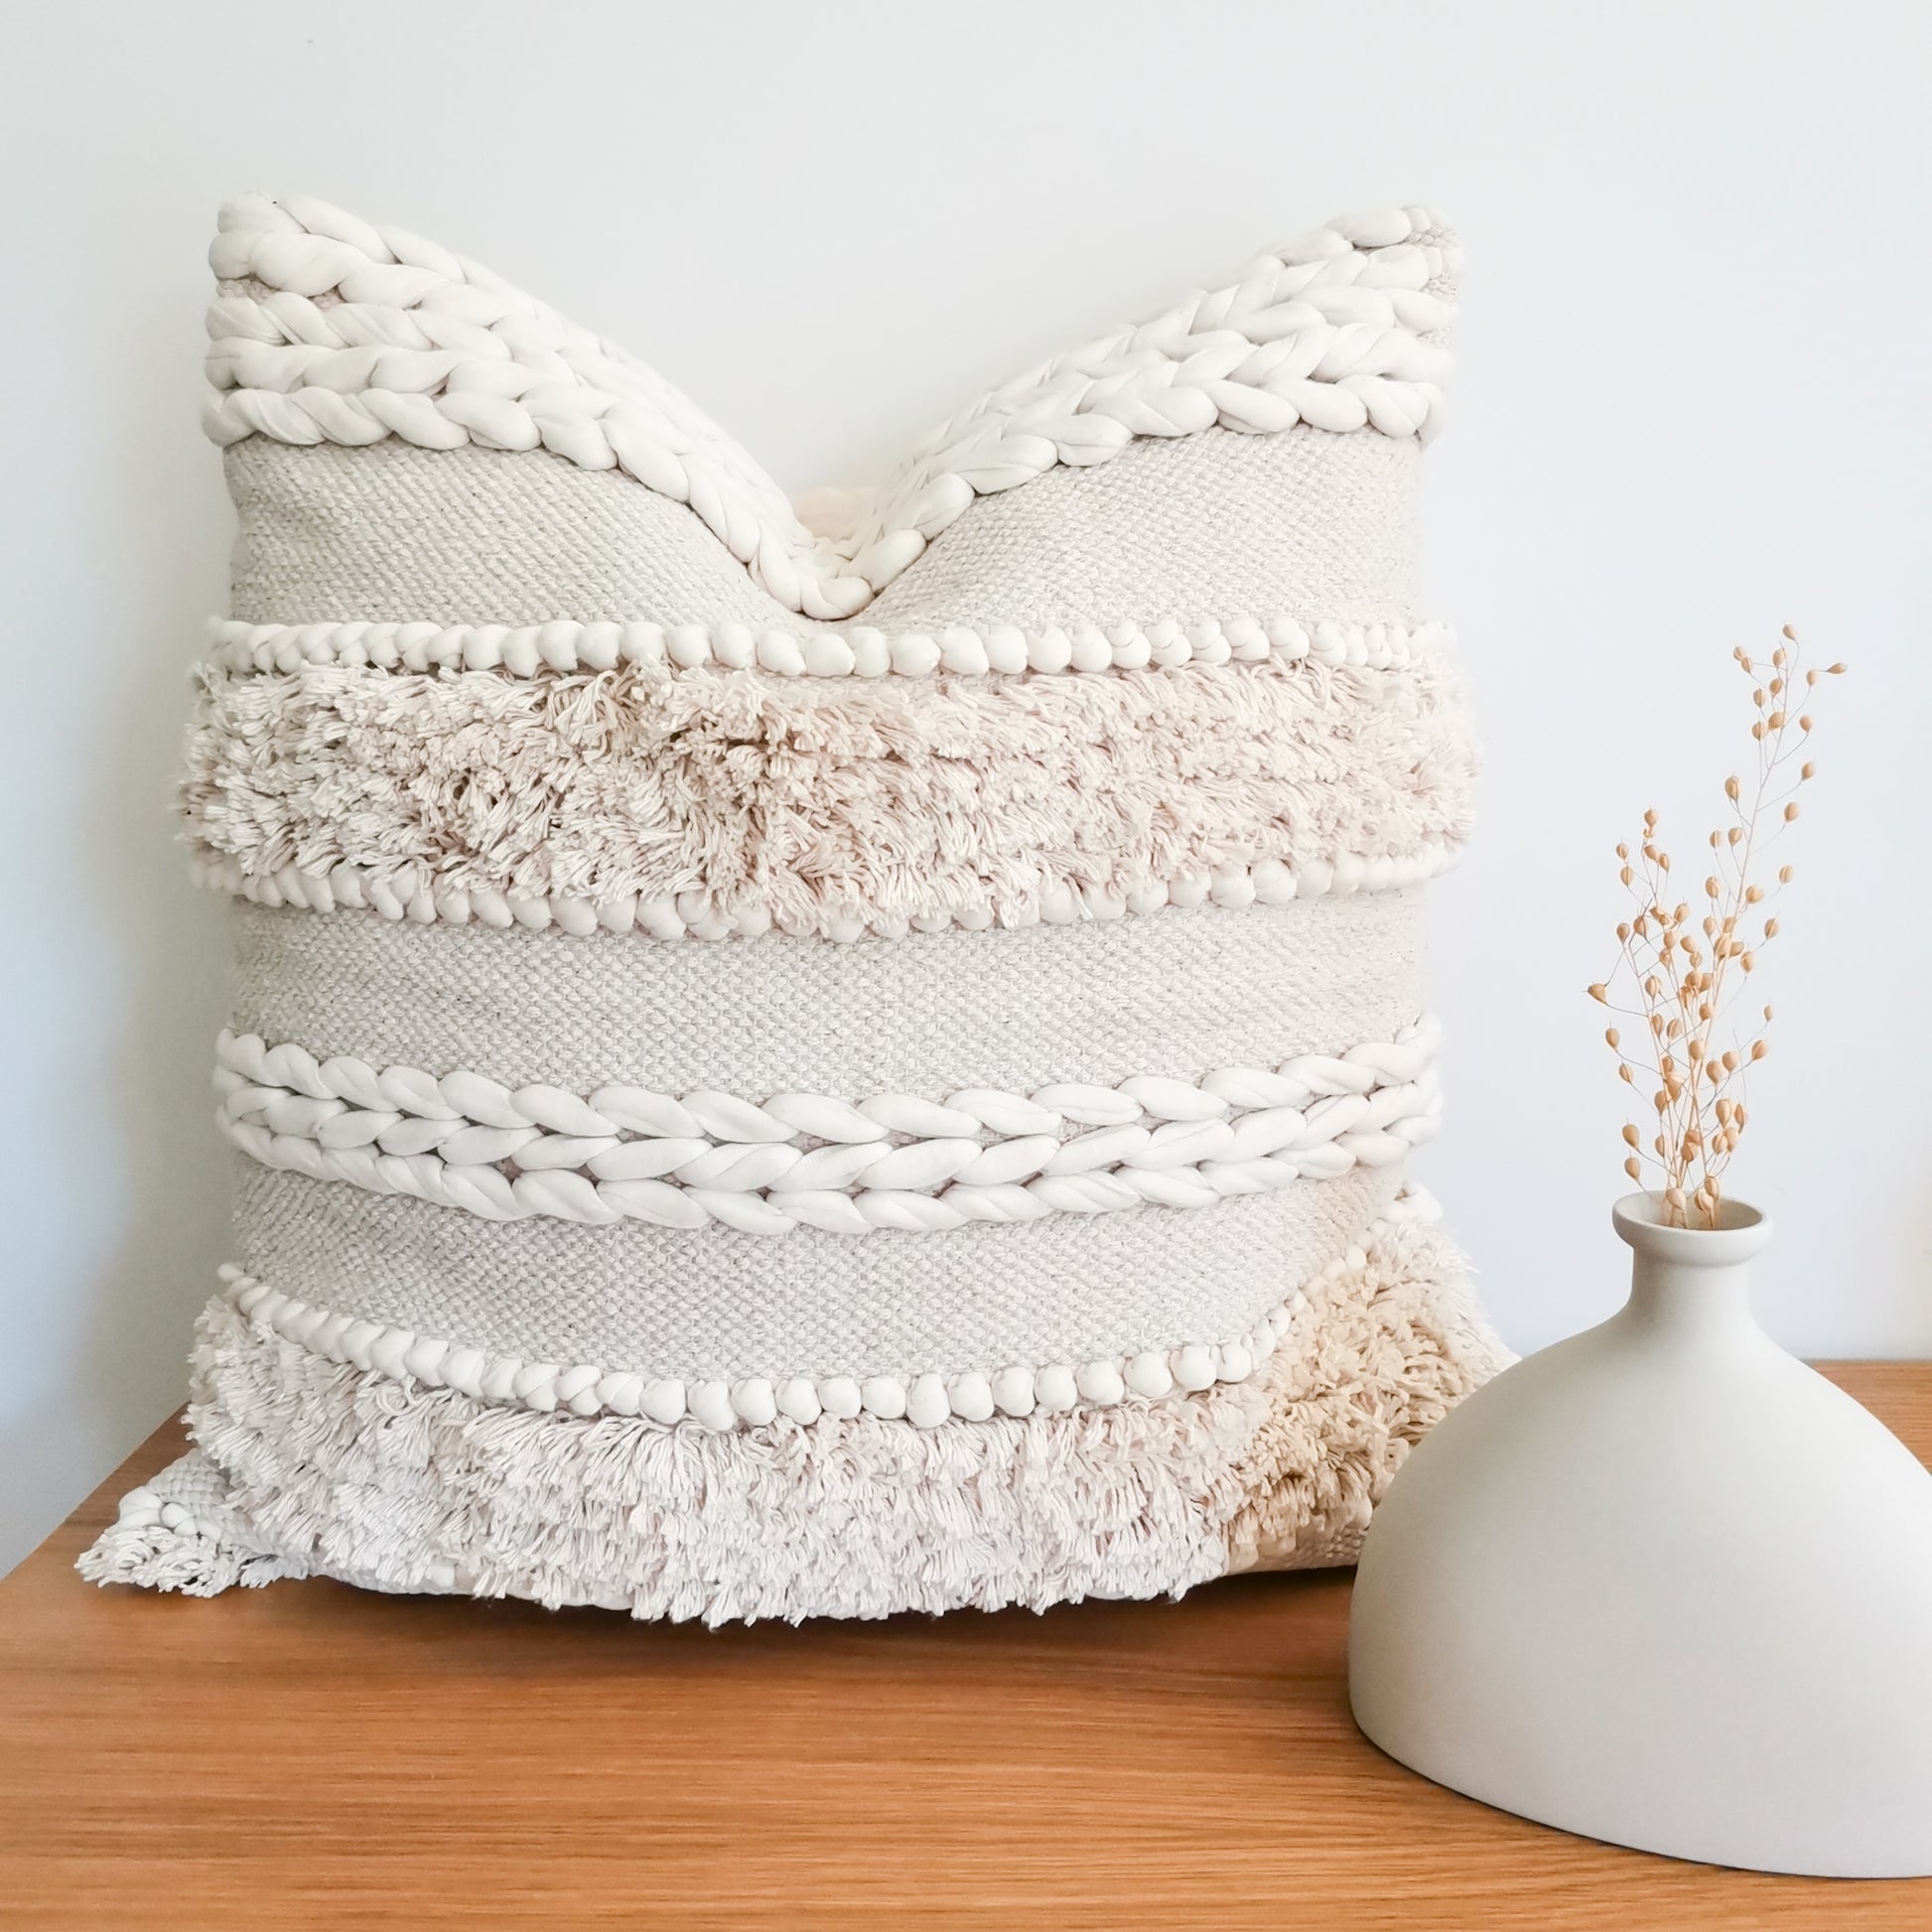 White boho cushion with frills and handloom weave